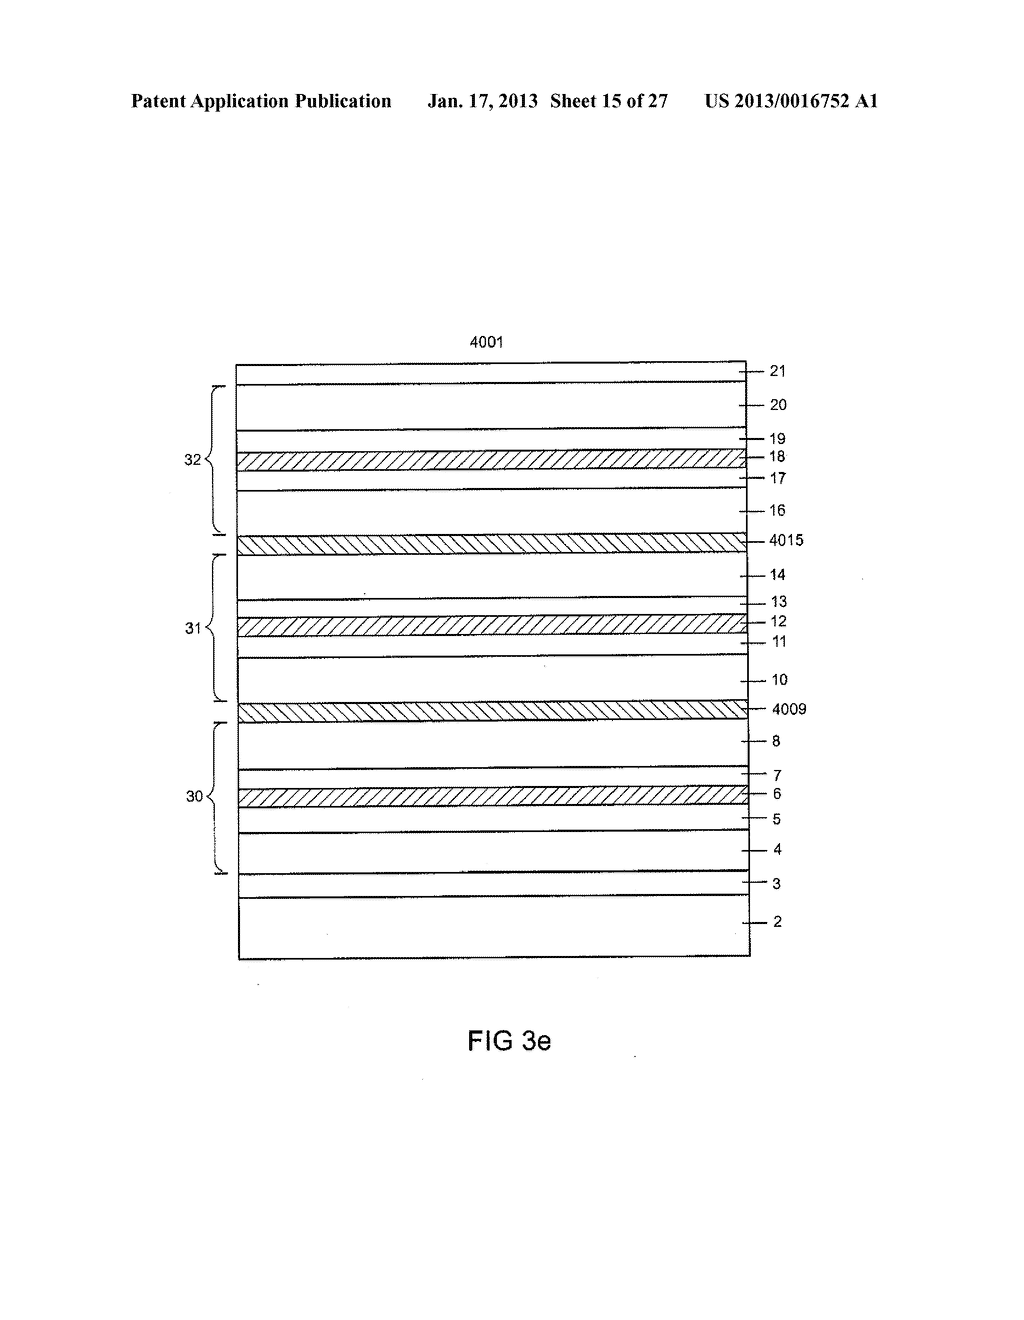 Laser Diode Assembly and Method for Producing a Laser Diode AssemblyAANM Lell; AlfredAACI Maxhutte-HaidhofAACO DEAAGP Lell; Alfred Maxhutte-Haidhof DEAANM Straussburg; MartinAACI DonaustaufAACO DEAAGP Straussburg; Martin Donaustauf DE - diagram, schematic, and image 16